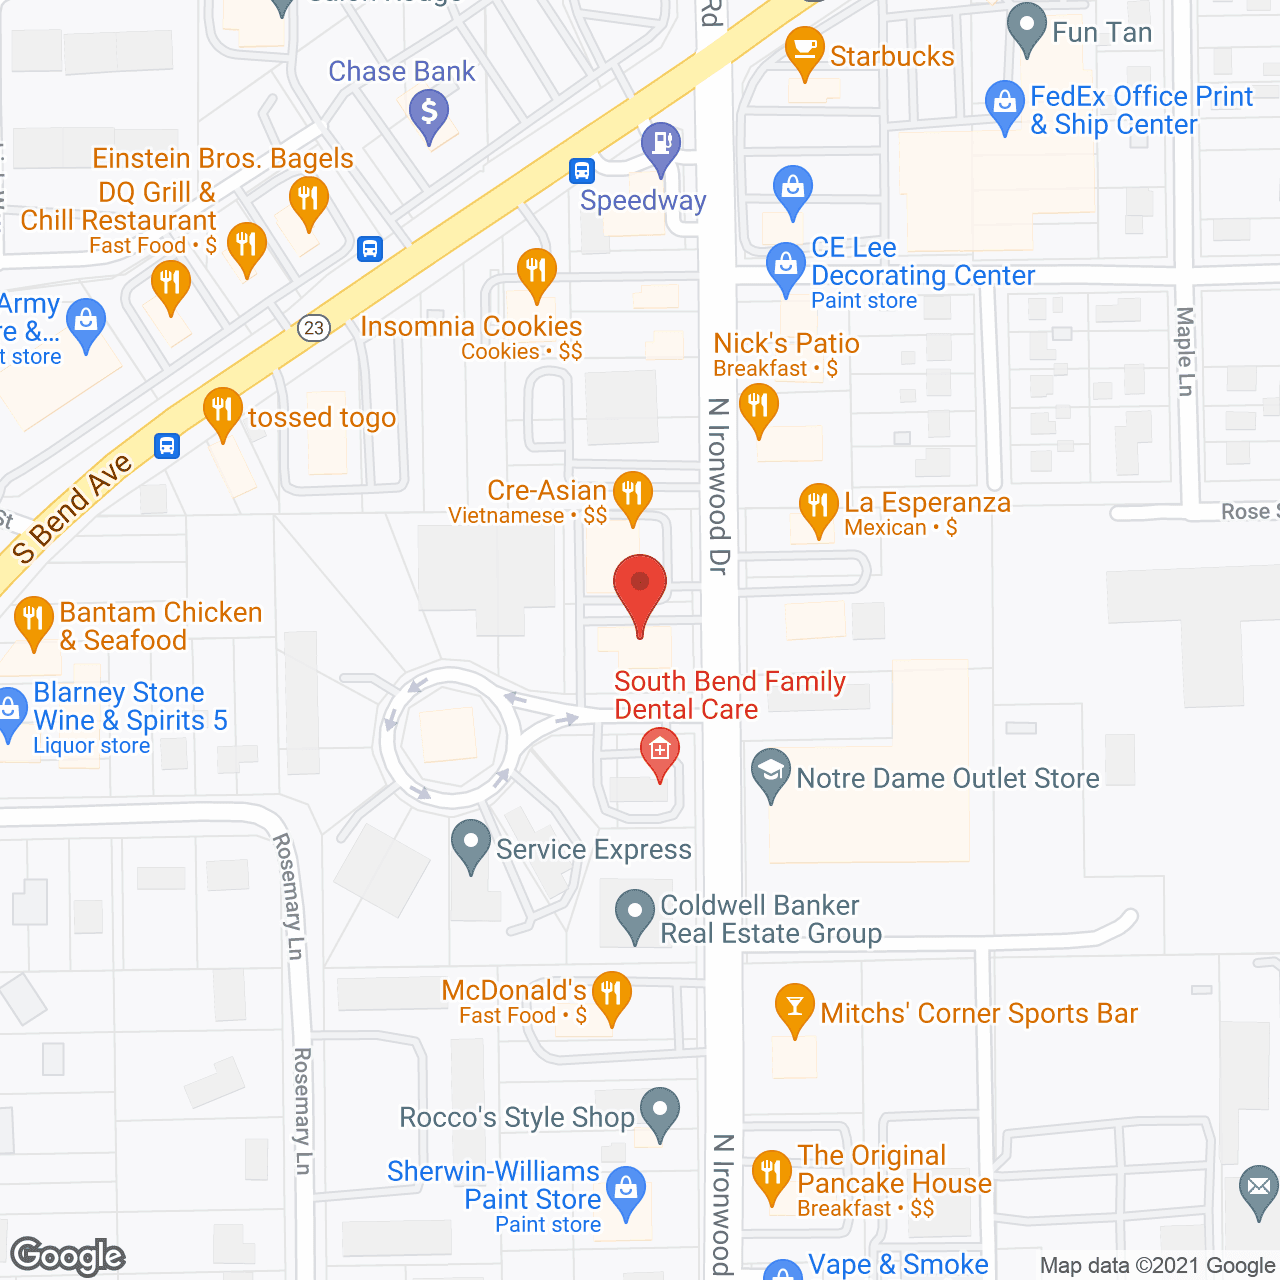 TheKey of South Bend, IN in google map